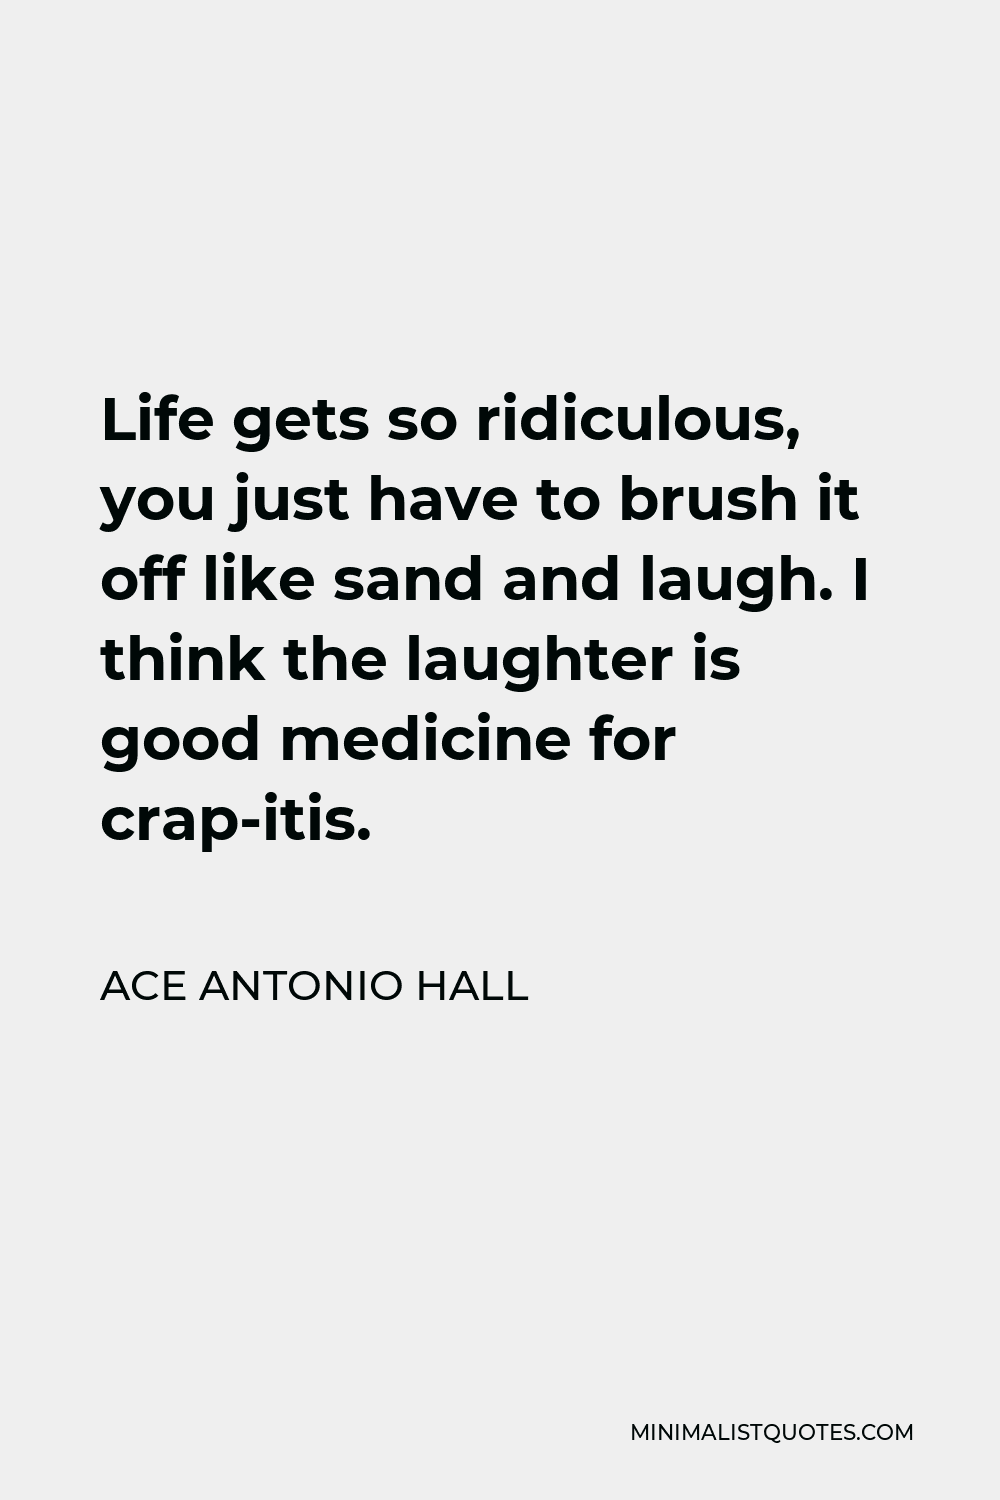 Ace Antonio Hall Quote - Life gets so ridiculous, you just have to brush it off like sand and laugh. I think the laughter is good medicine for crap-itis.